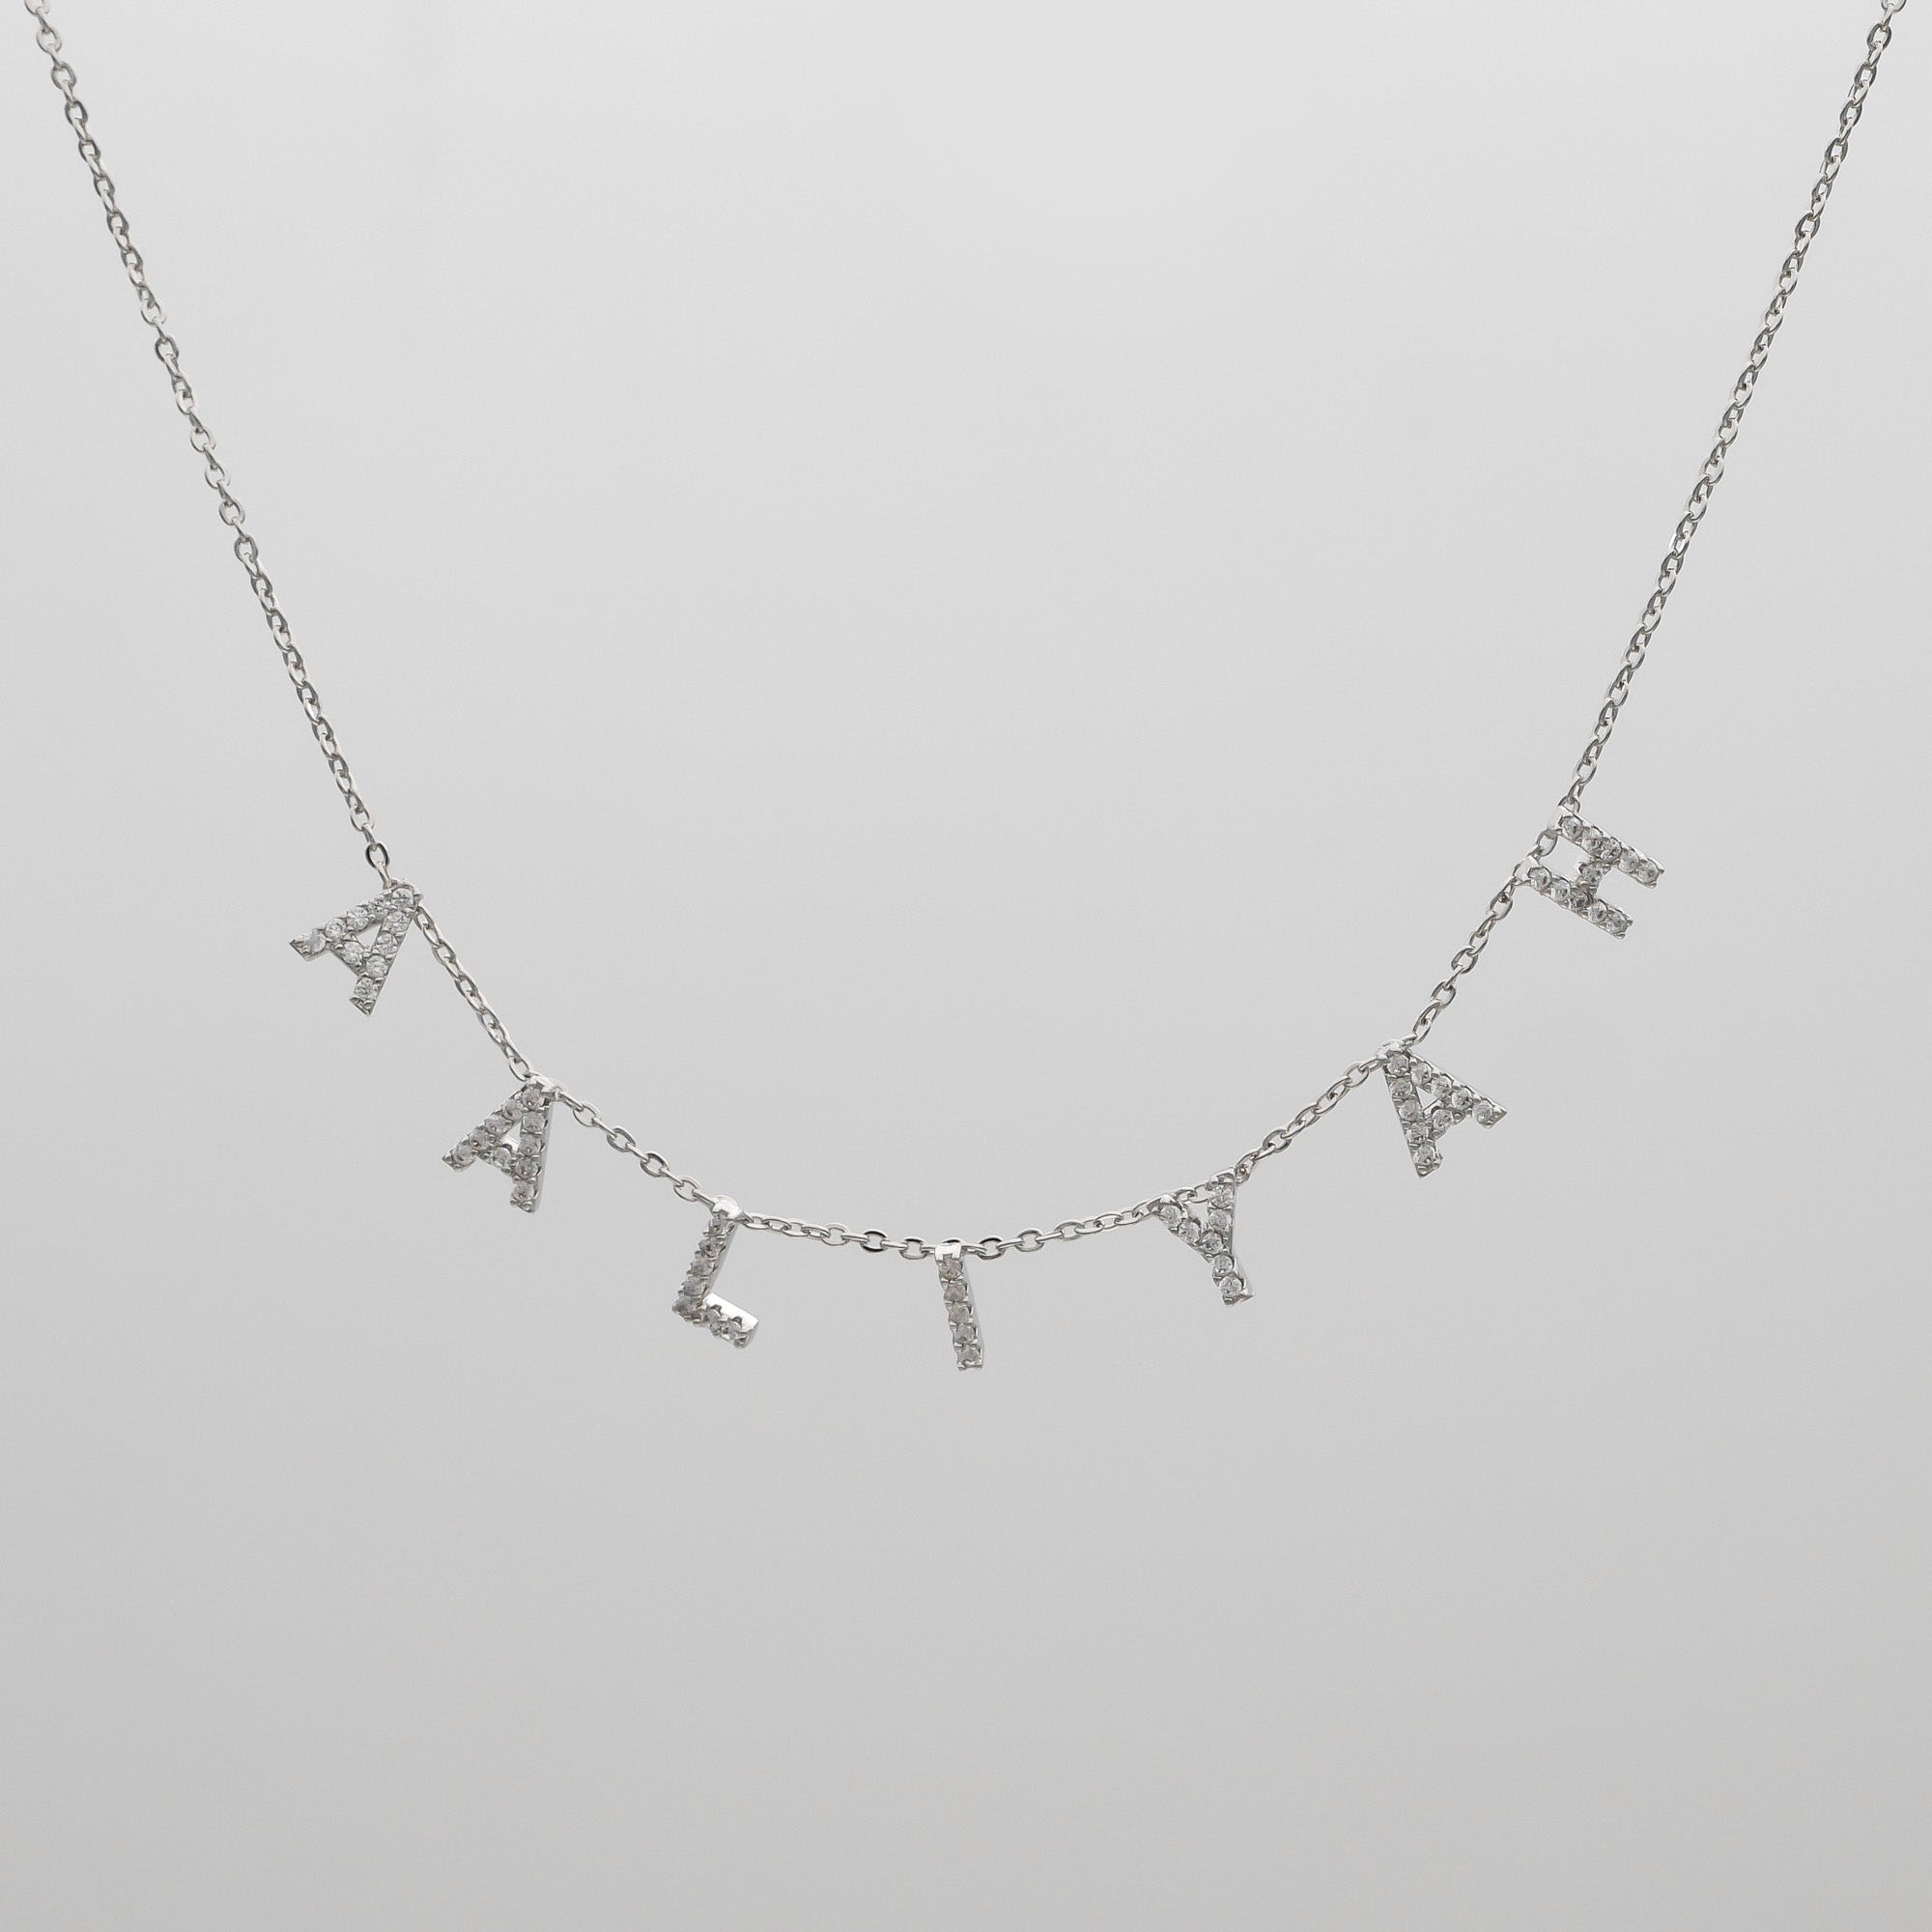 ICY Suspended Custom Name Necklace